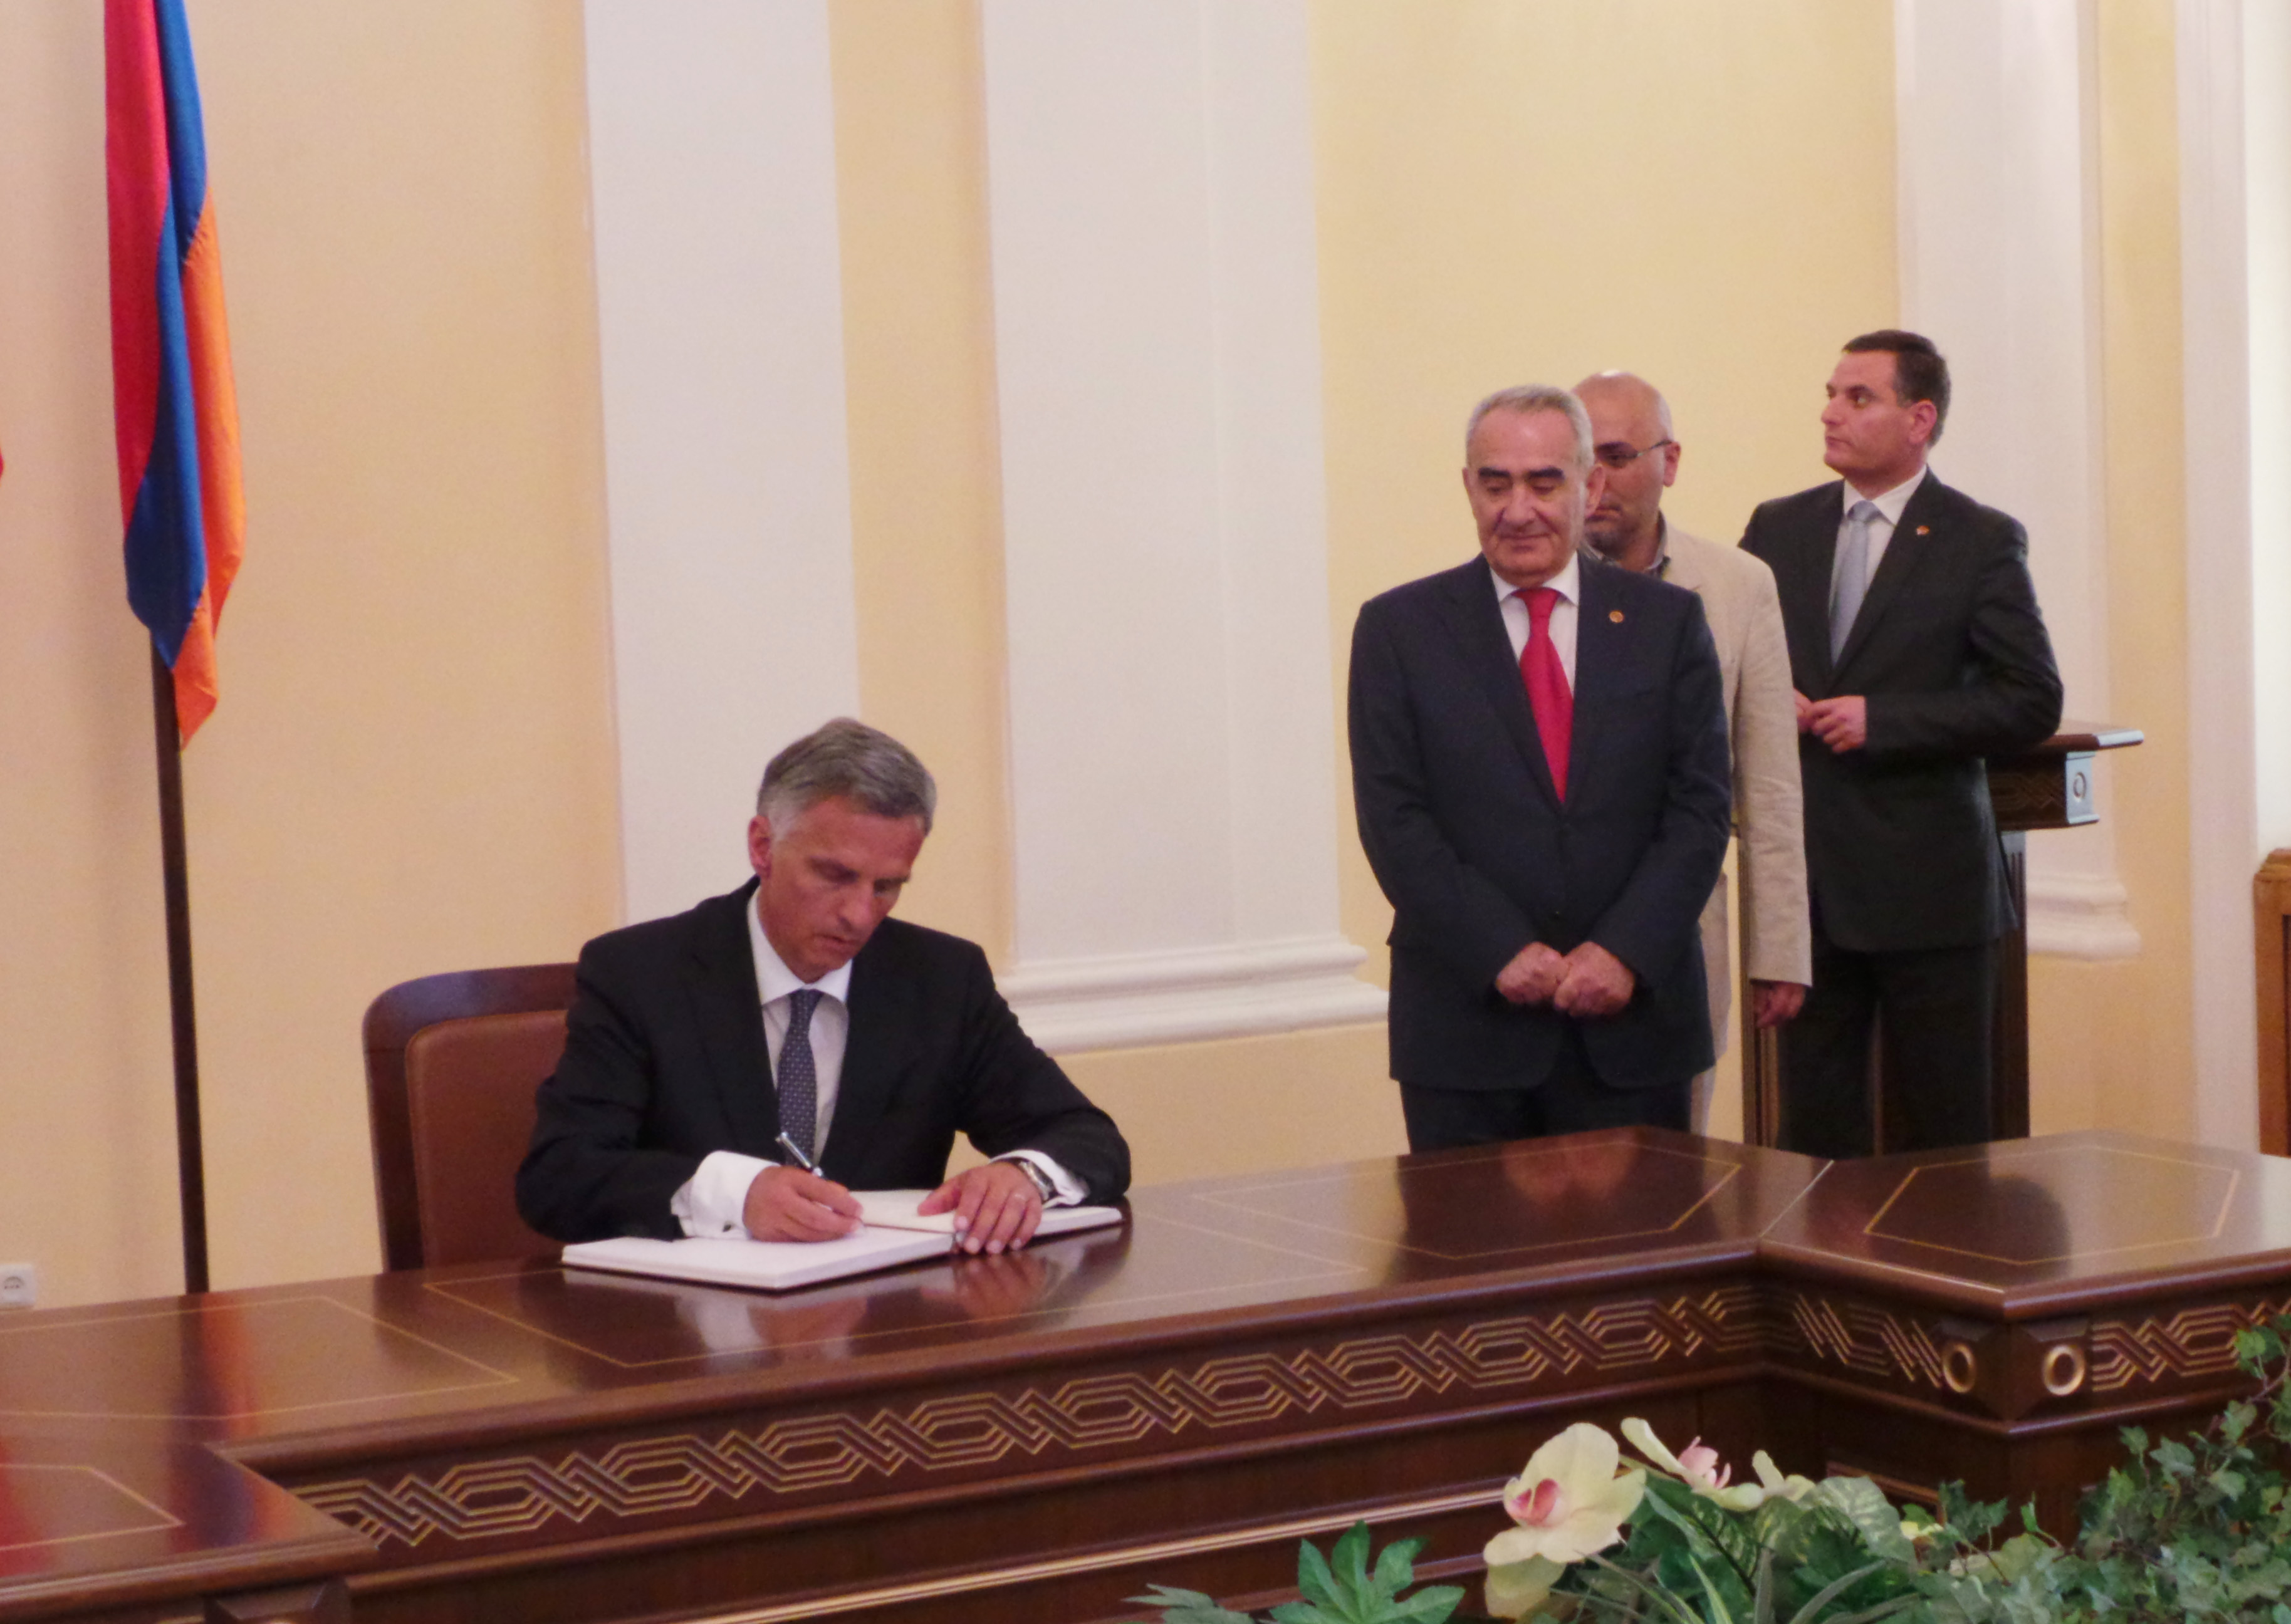 After talks with members of parliament President Burkhalter signs the guest book of the Armenian parliament. To his right, the speaker of the Armenian parliament, Galust Sahakyan.